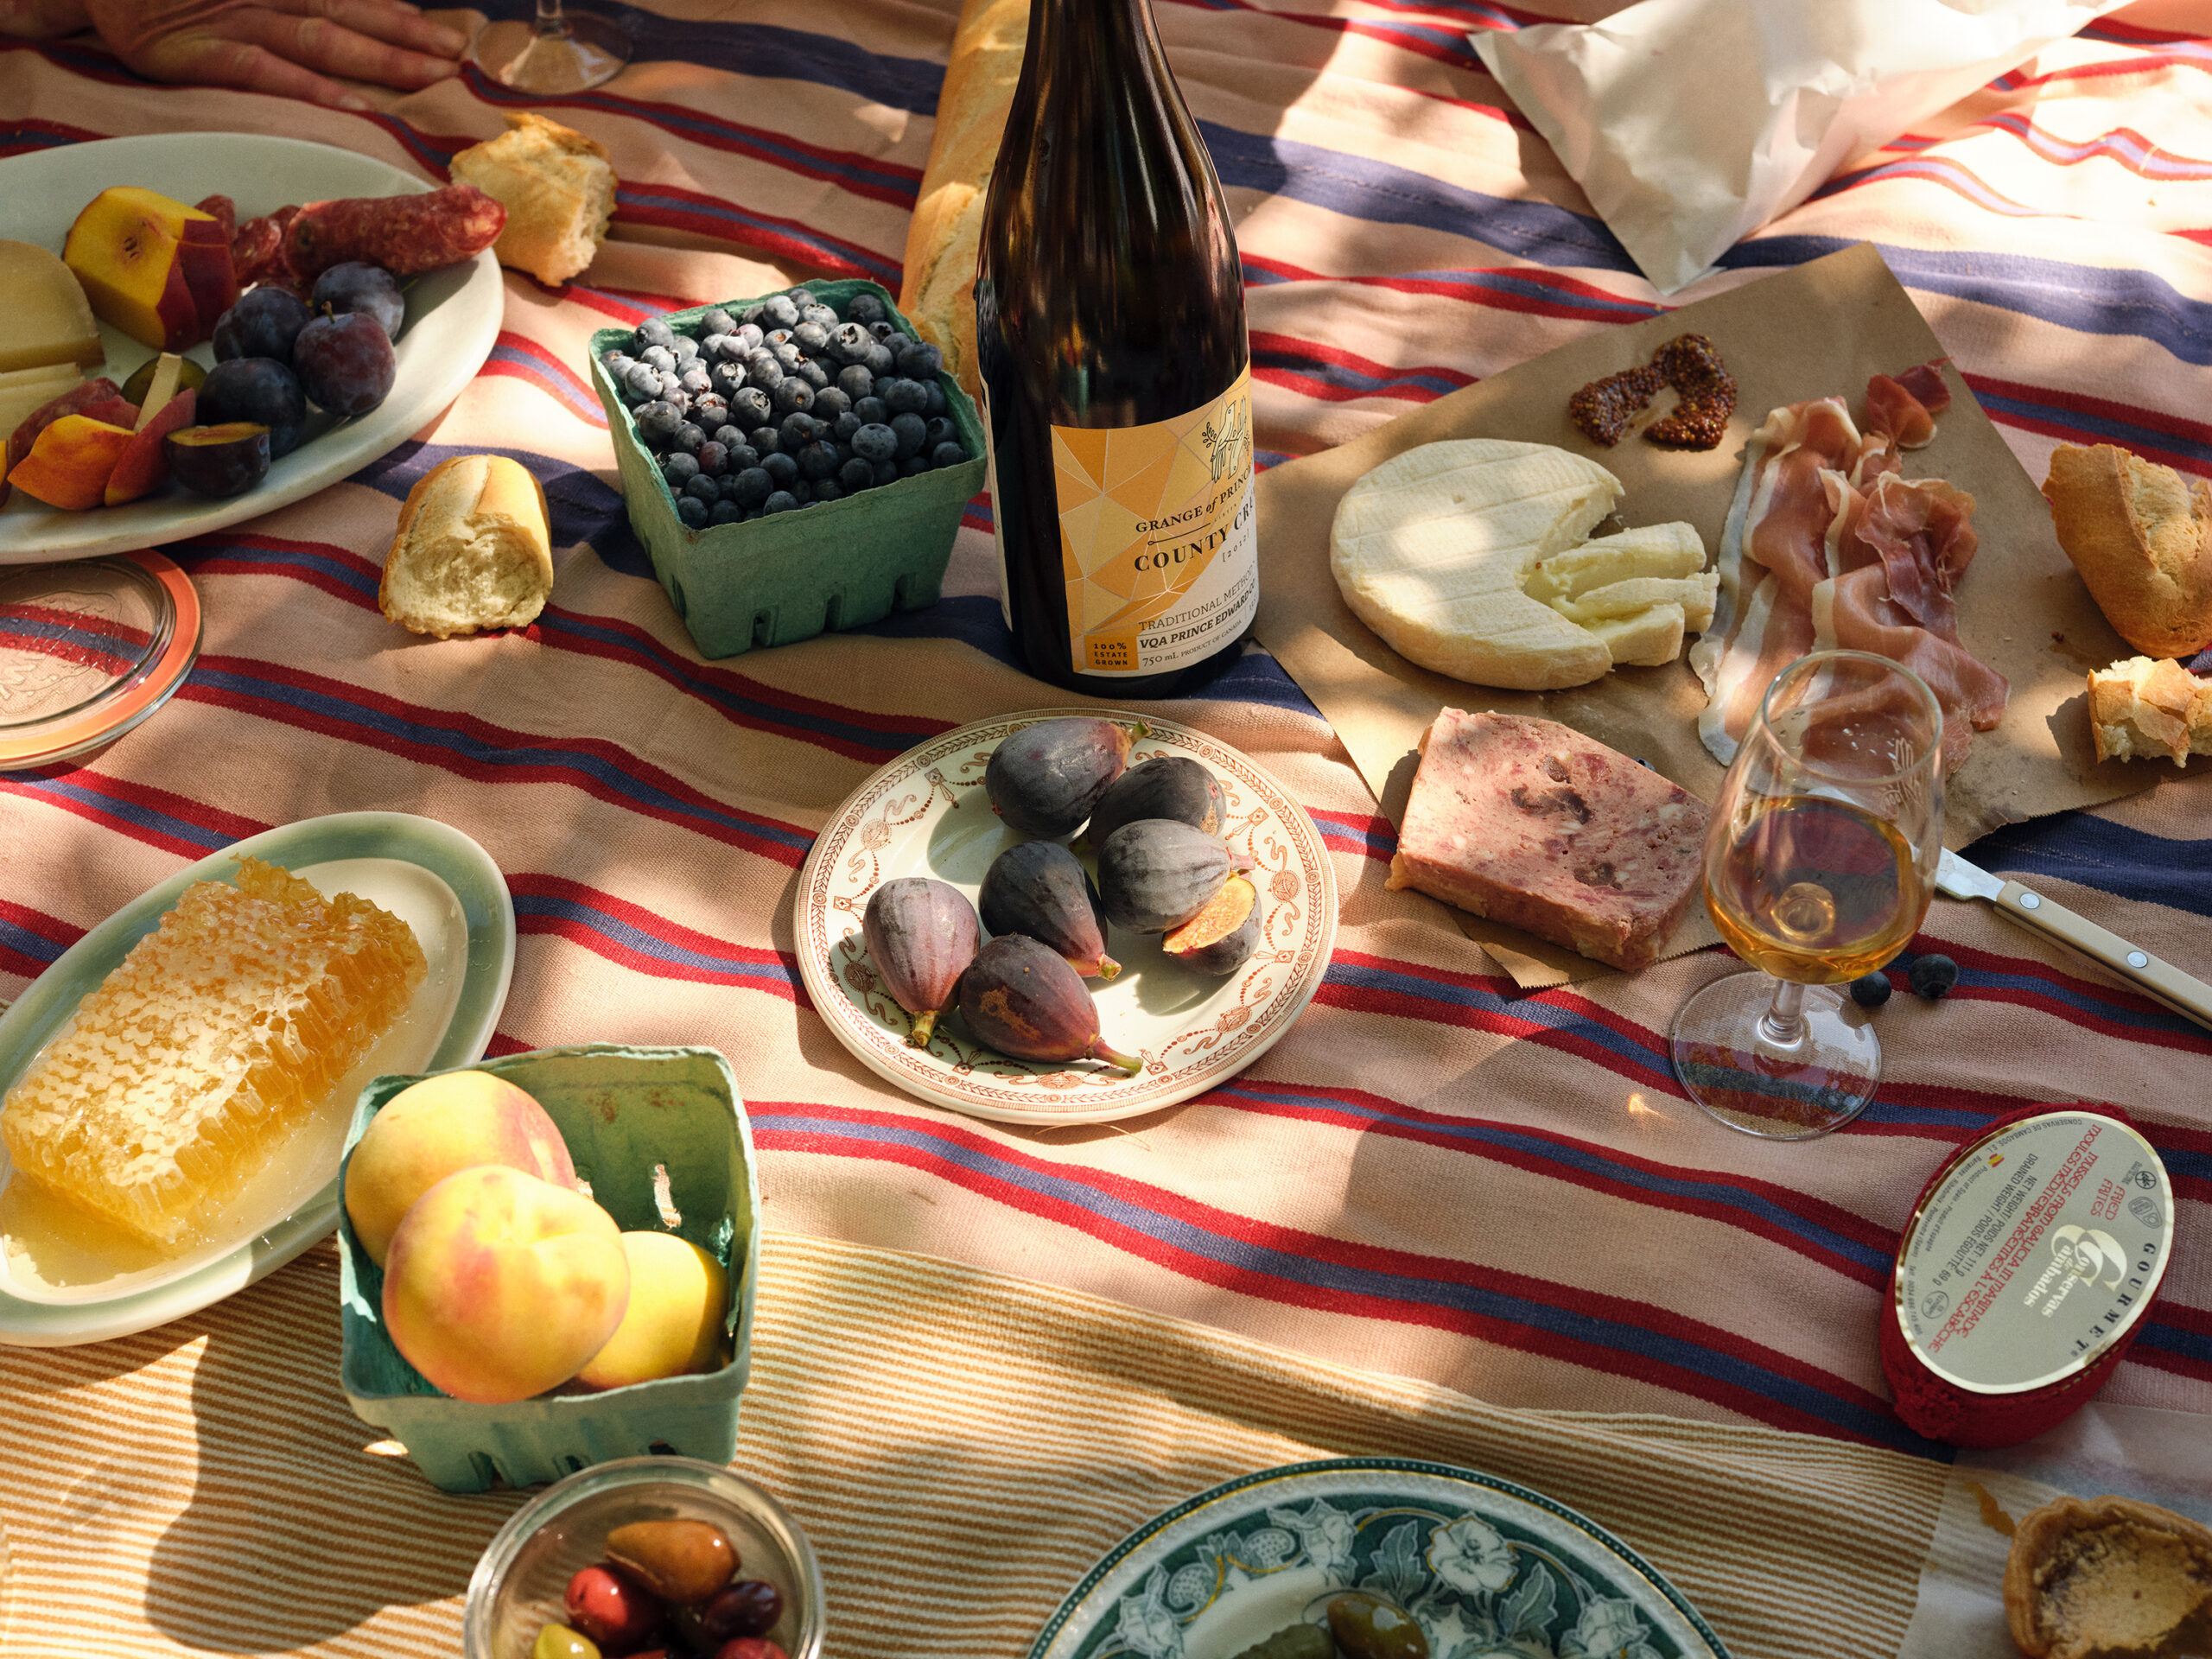 A picnic setup on a striped blanket with a bottle of wine, fruit and cheese